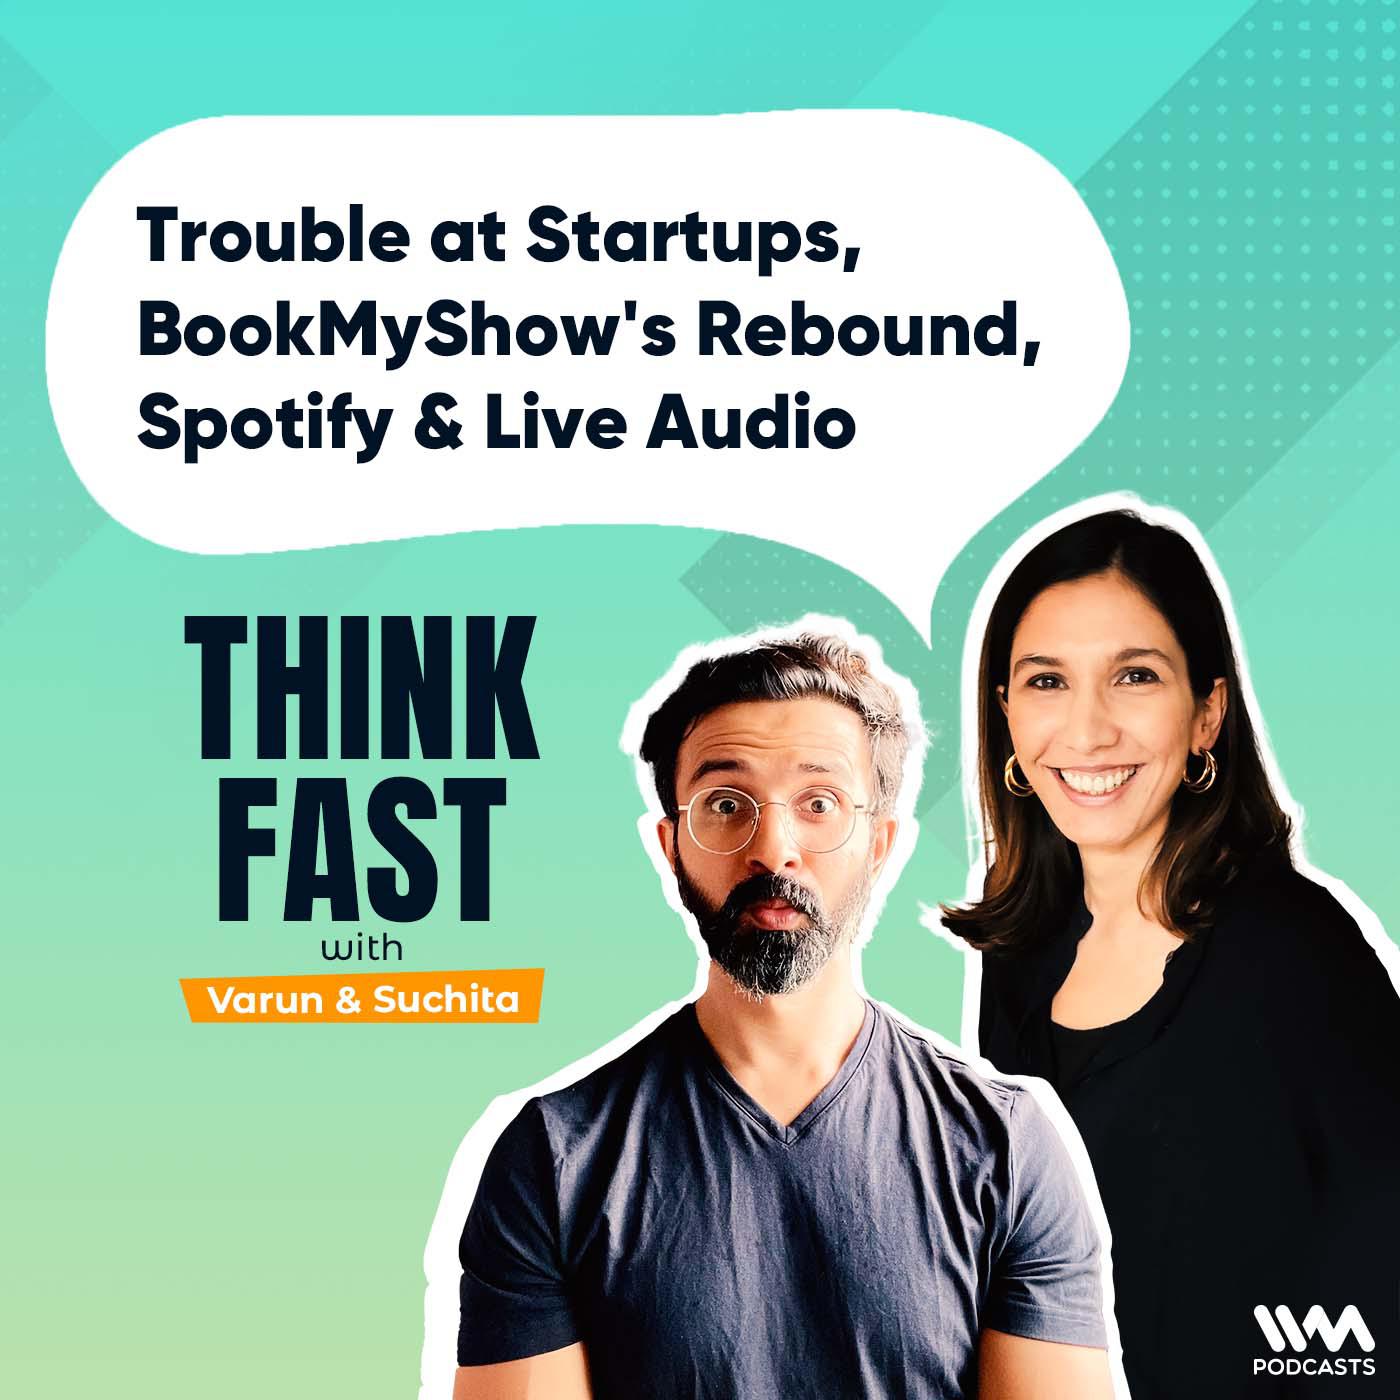 Trouble at Startups, BookMyShow's Rebound, Spotify & Live Audio